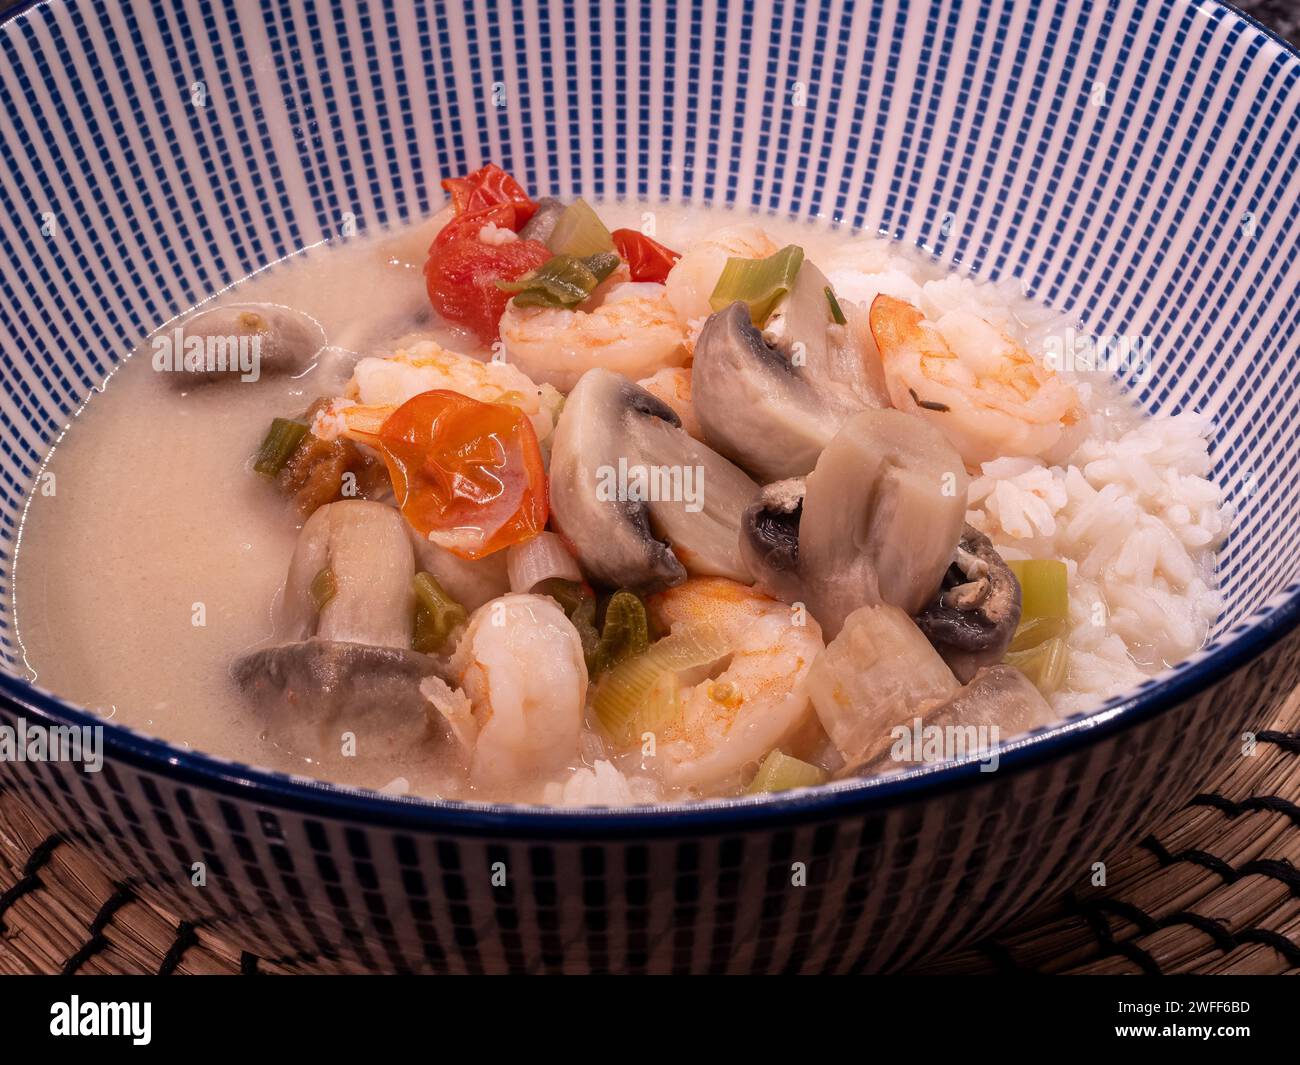 A large blue and white bowl holds a delectable Thai coconut soup infused with spiciness, featuring succulent shrimps, juicy tomatoes, mushrooms, and f Stock Photo